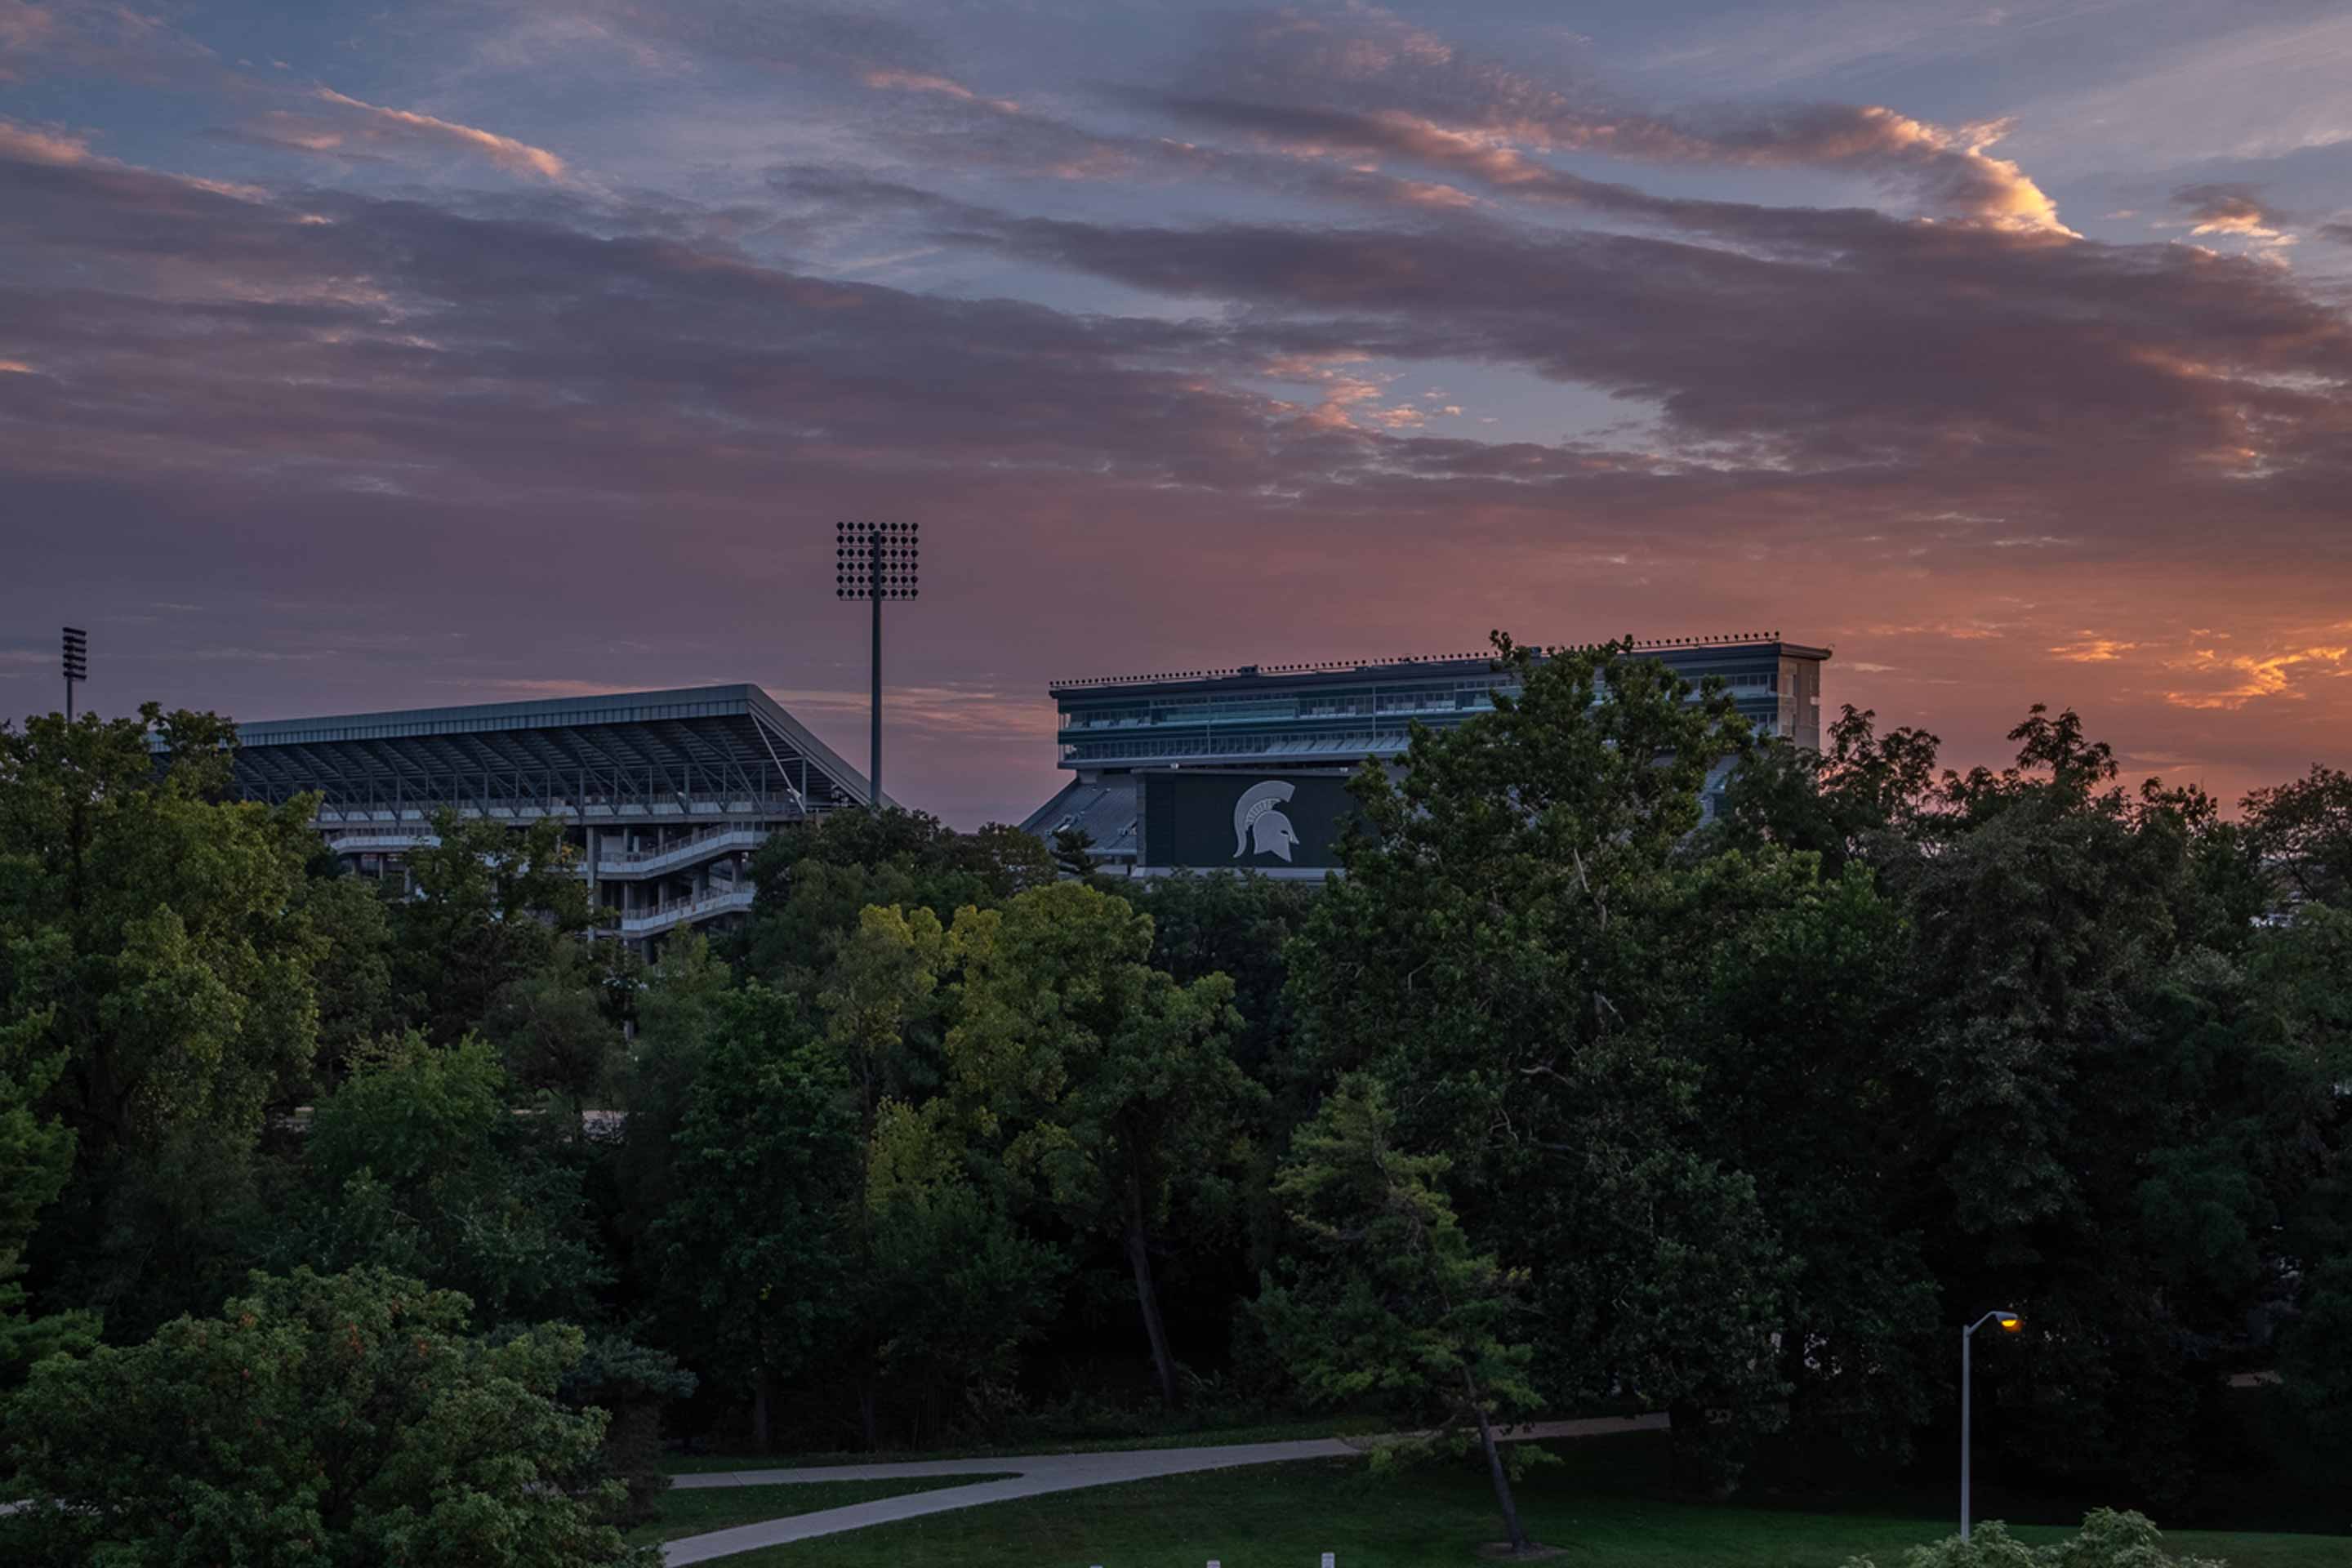 Spartan stadium at dusk with beautiful sunset of peach, pinks, and purples 